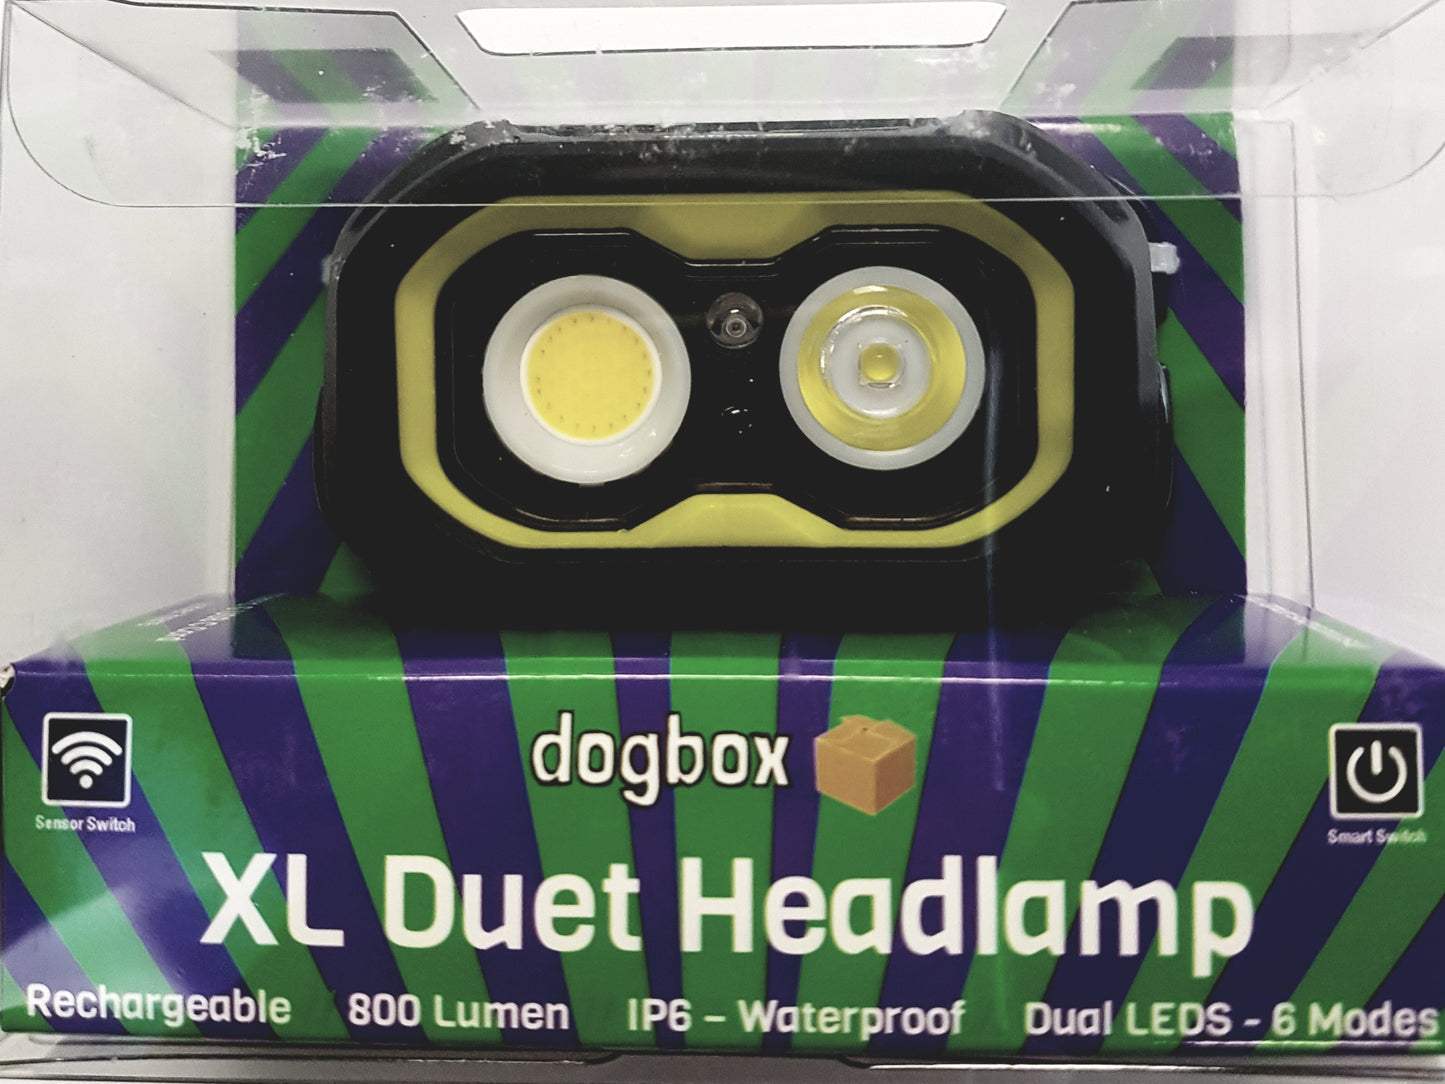 Headlamp - Dogbox Rechargeable with Hands-Free Mode